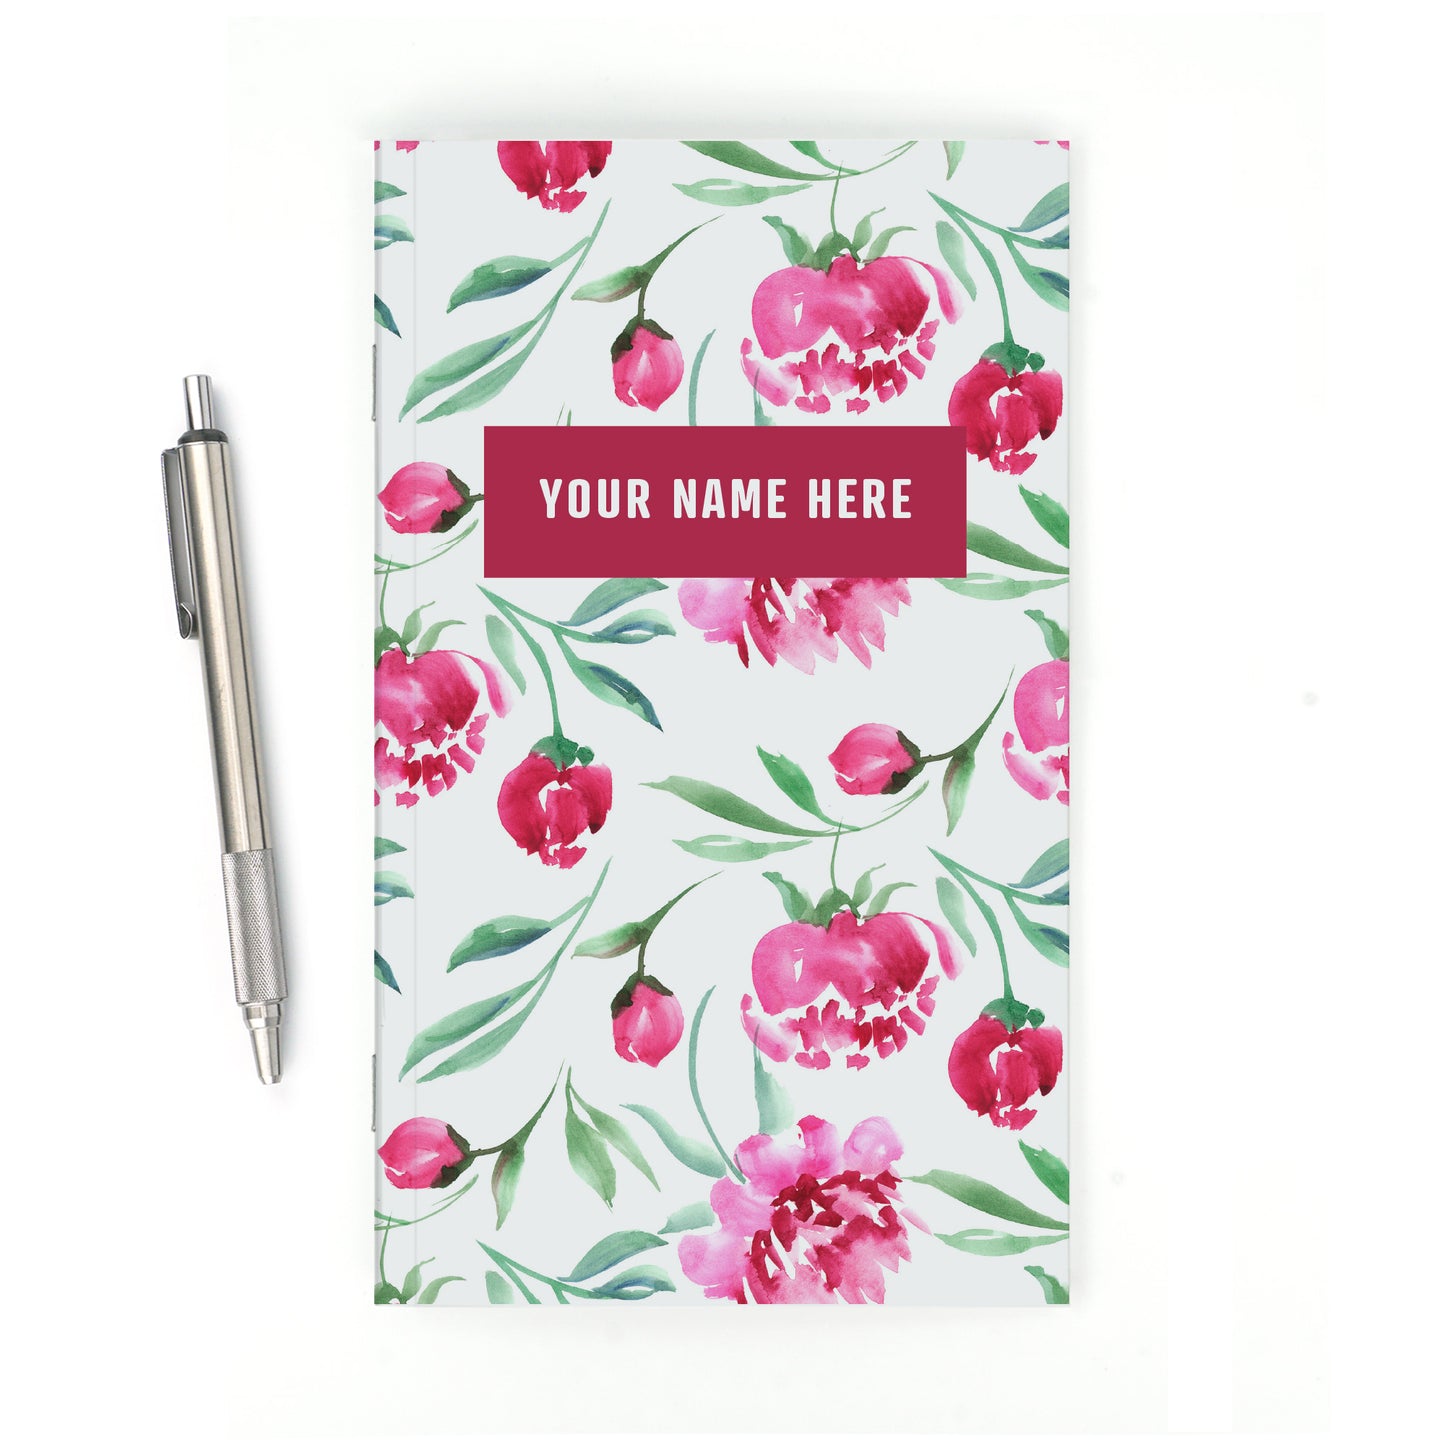 Personalized Notebook, Watercolor Buds, Add Your Name